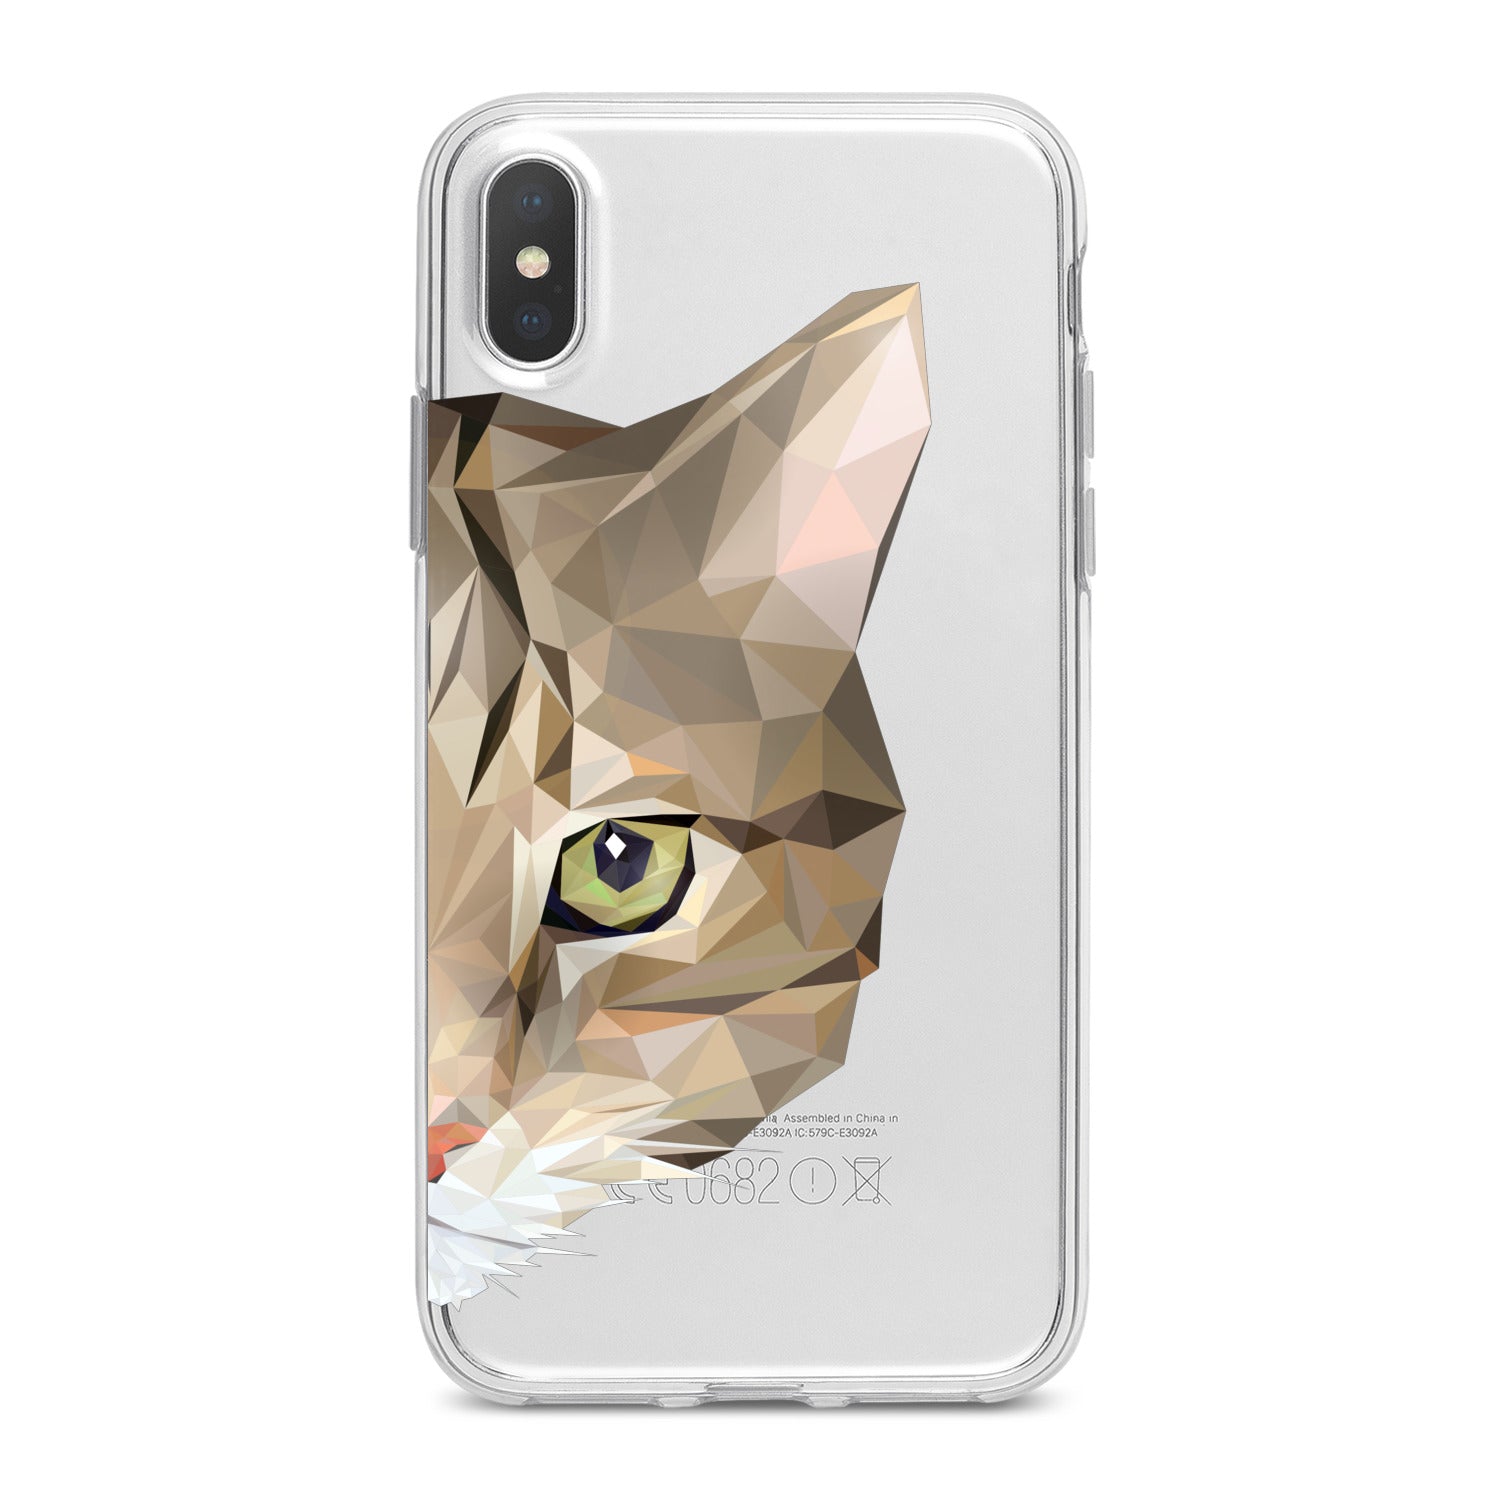 Lex Altern Graphical Cat Phone Case for your iPhone & Android phone.